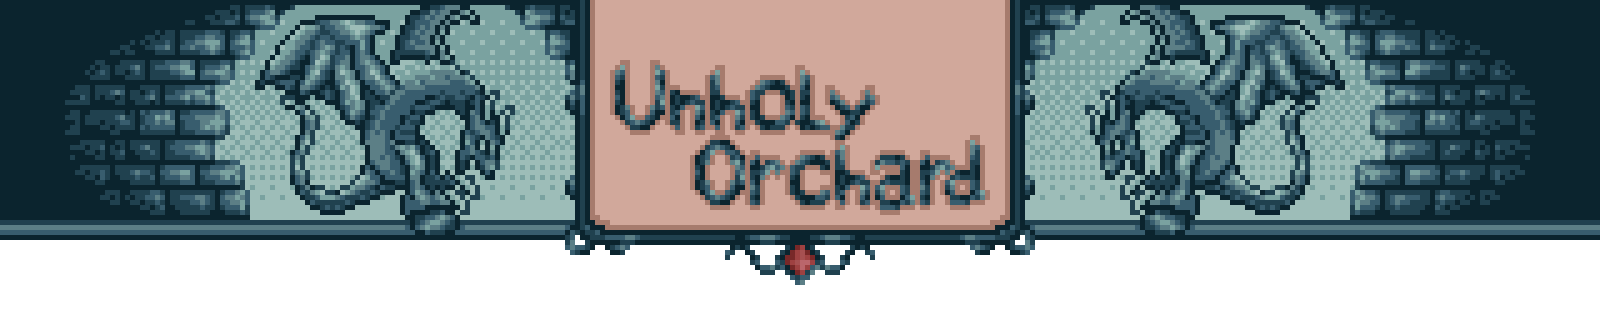 The Unholy Orchard